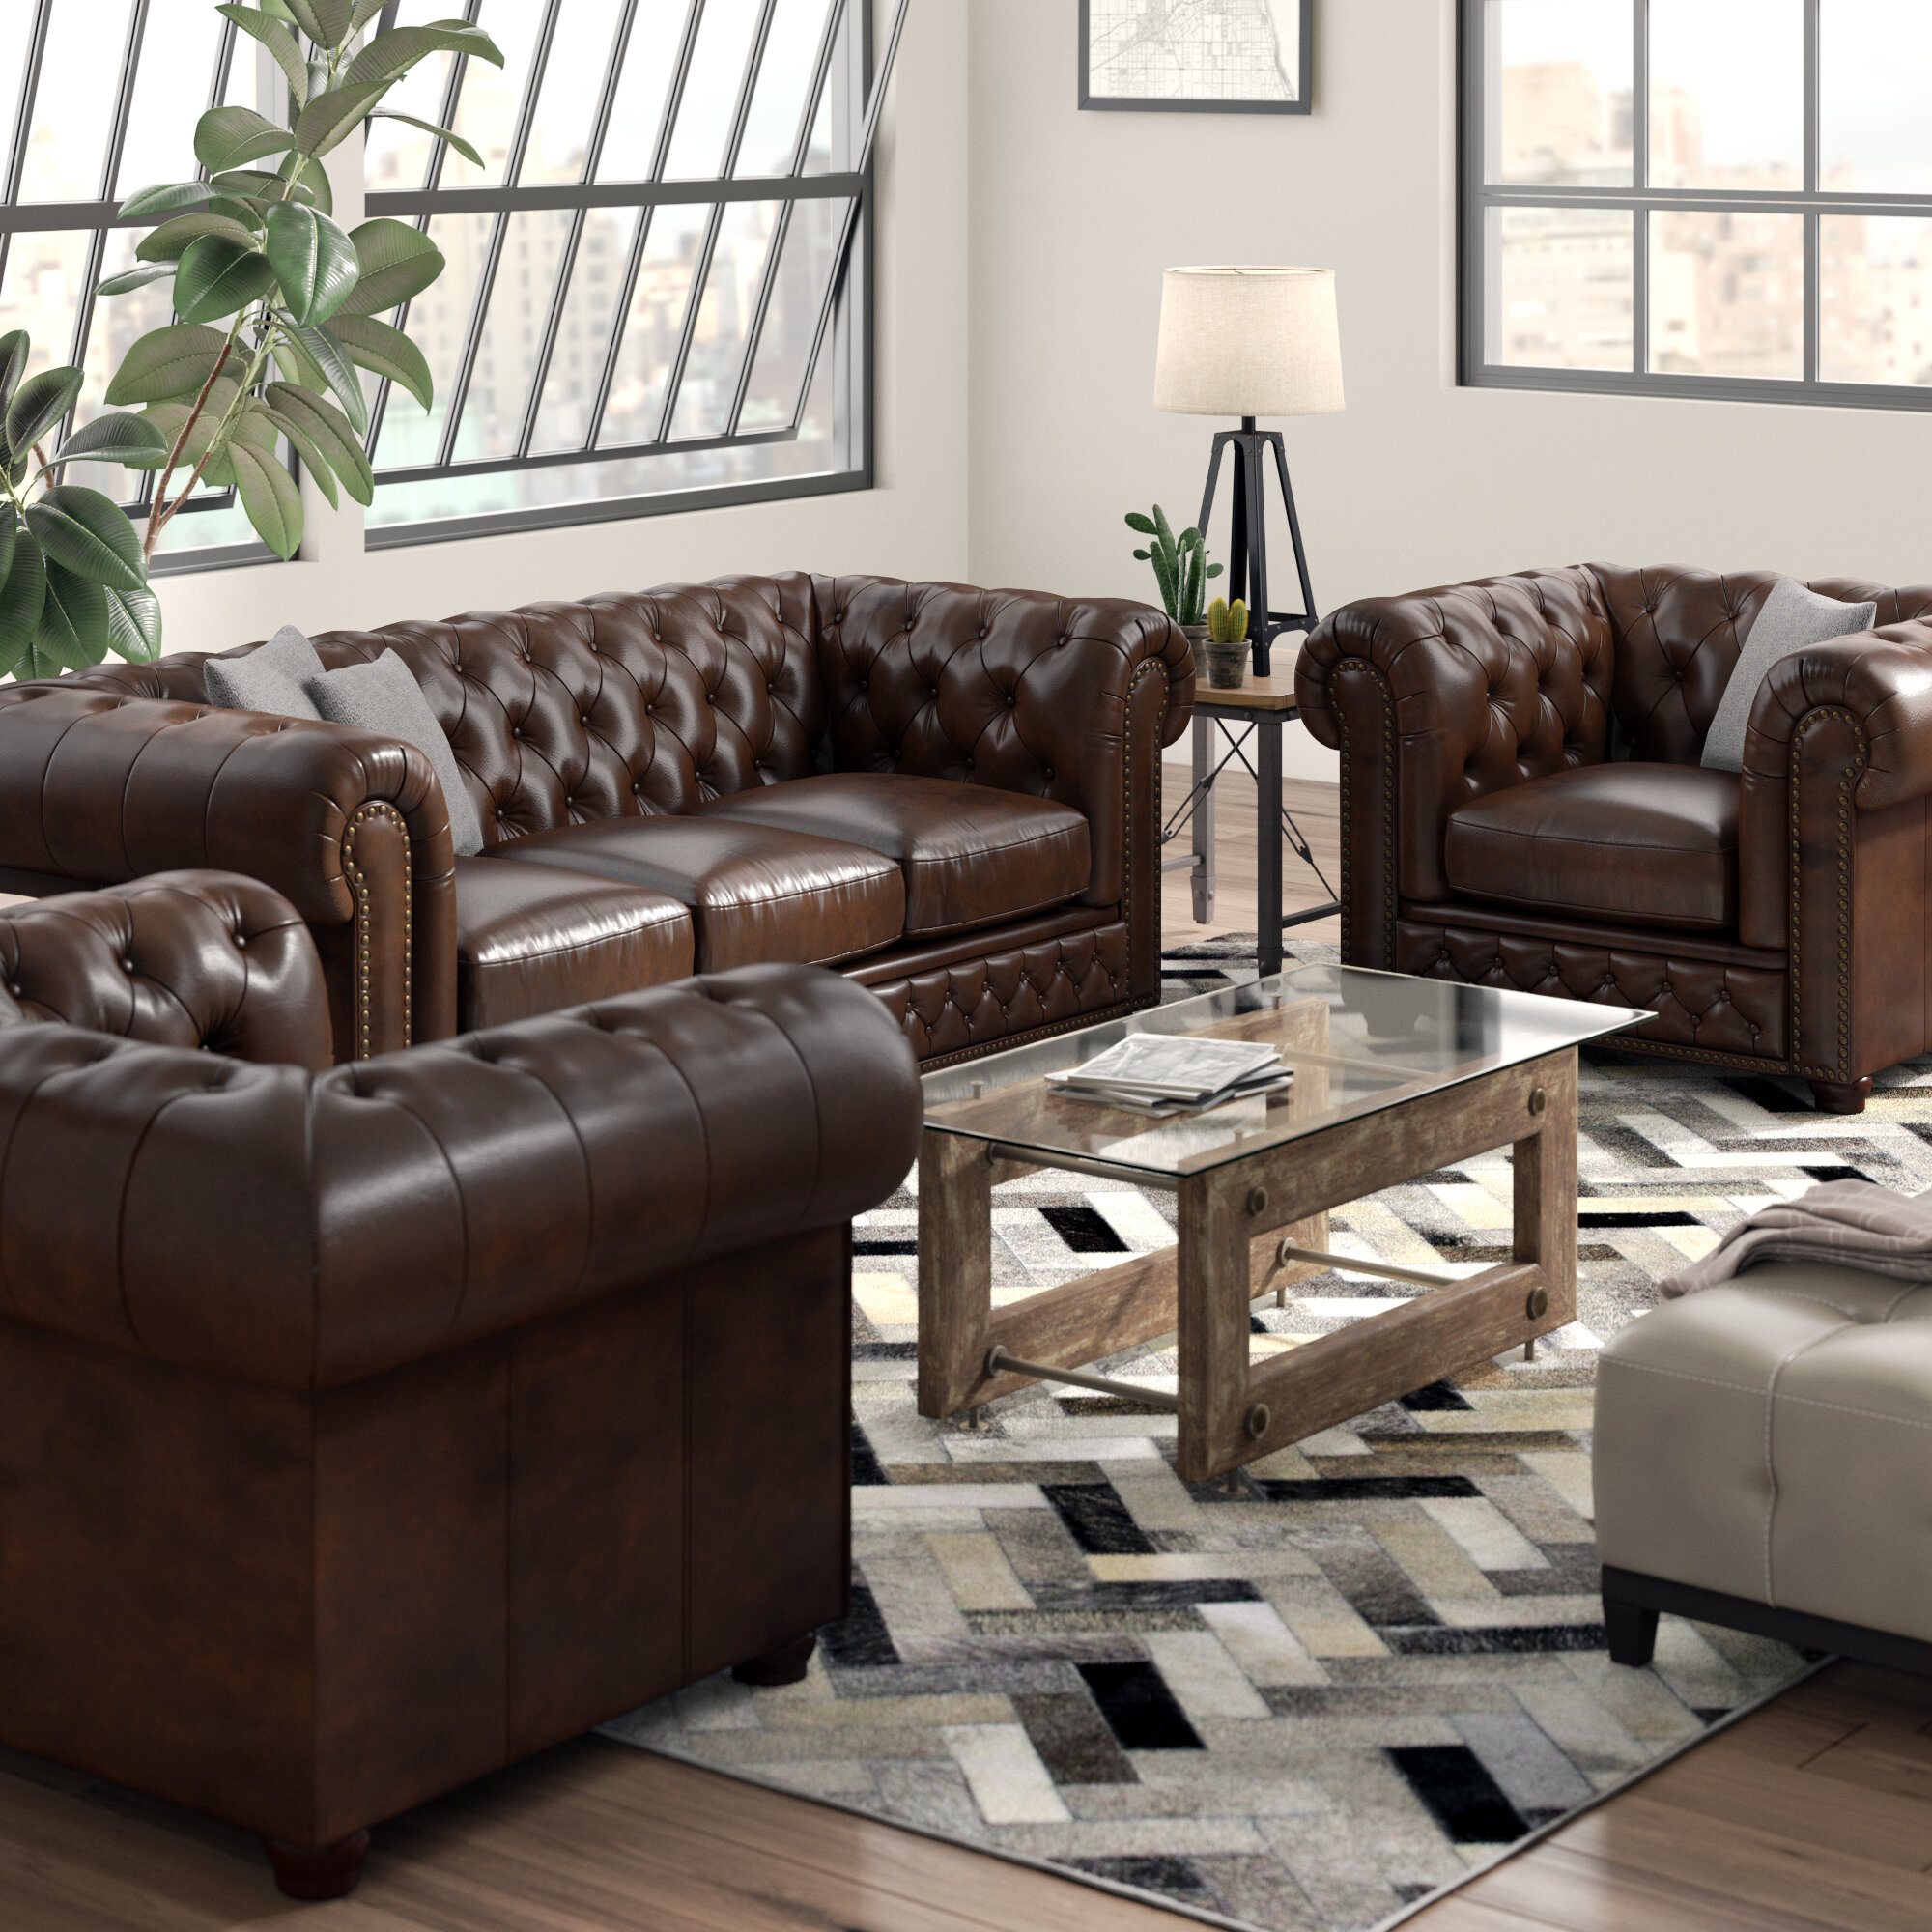 40+ Breathtaking Collections Of Leather Living Room Furniture Sets